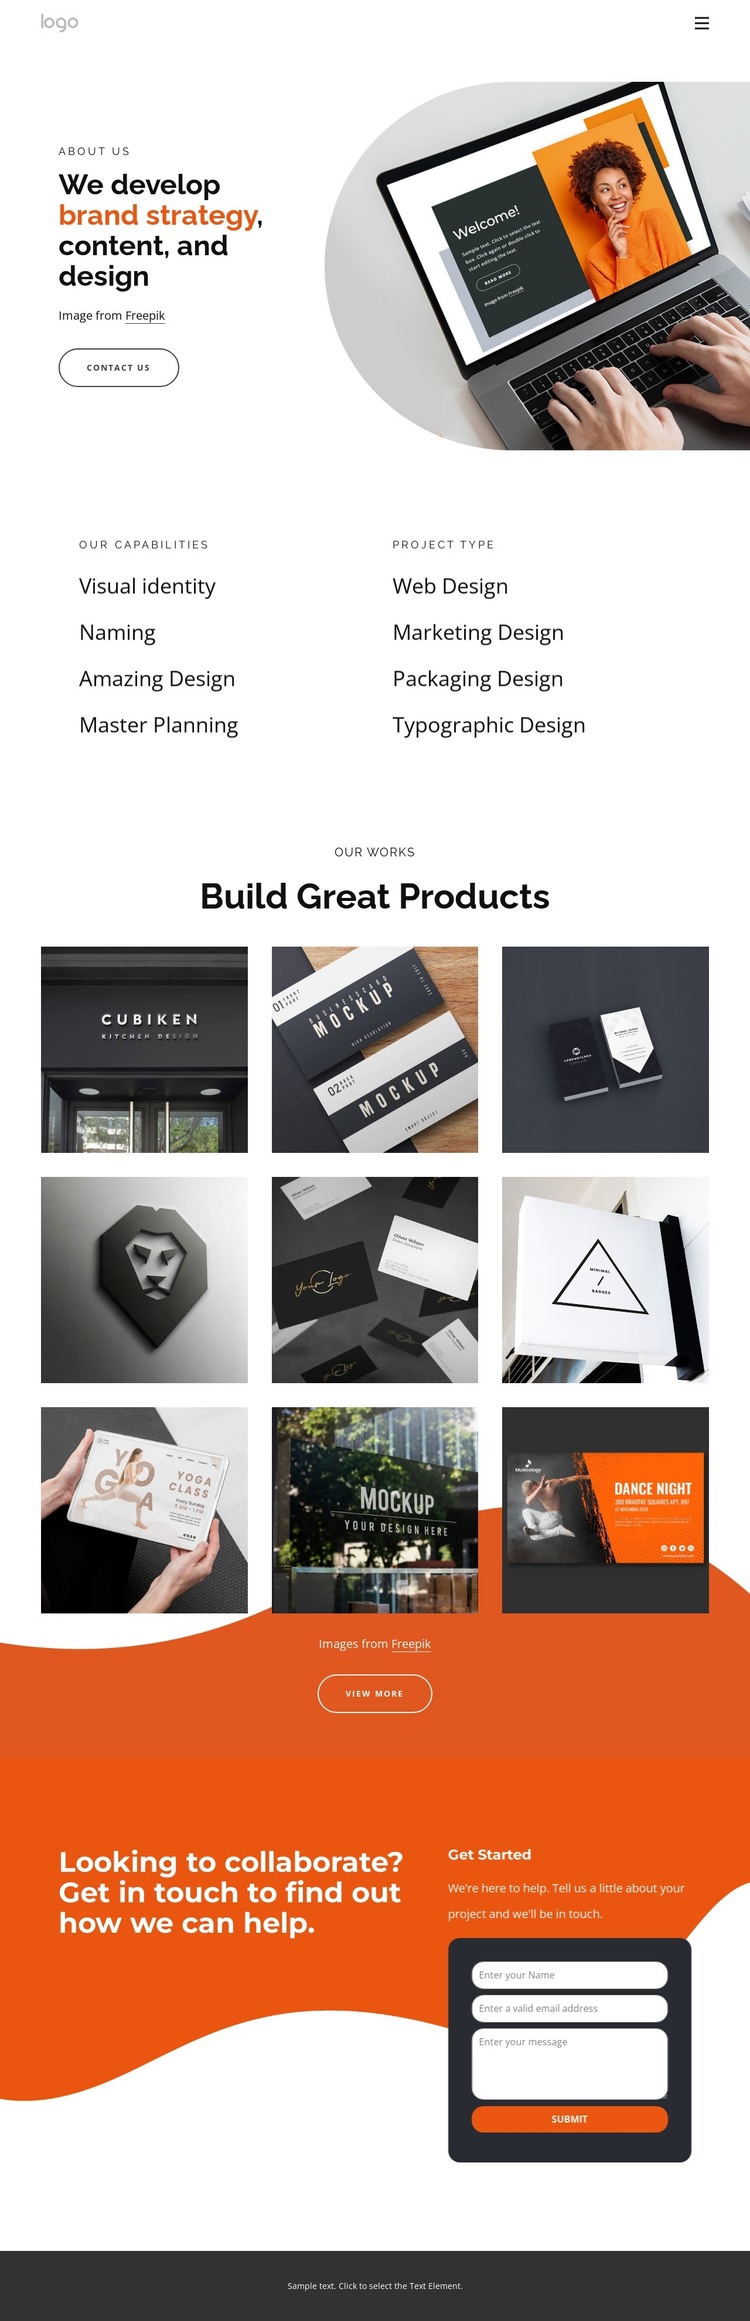 We create thoughtful experiences for humans HTML Template